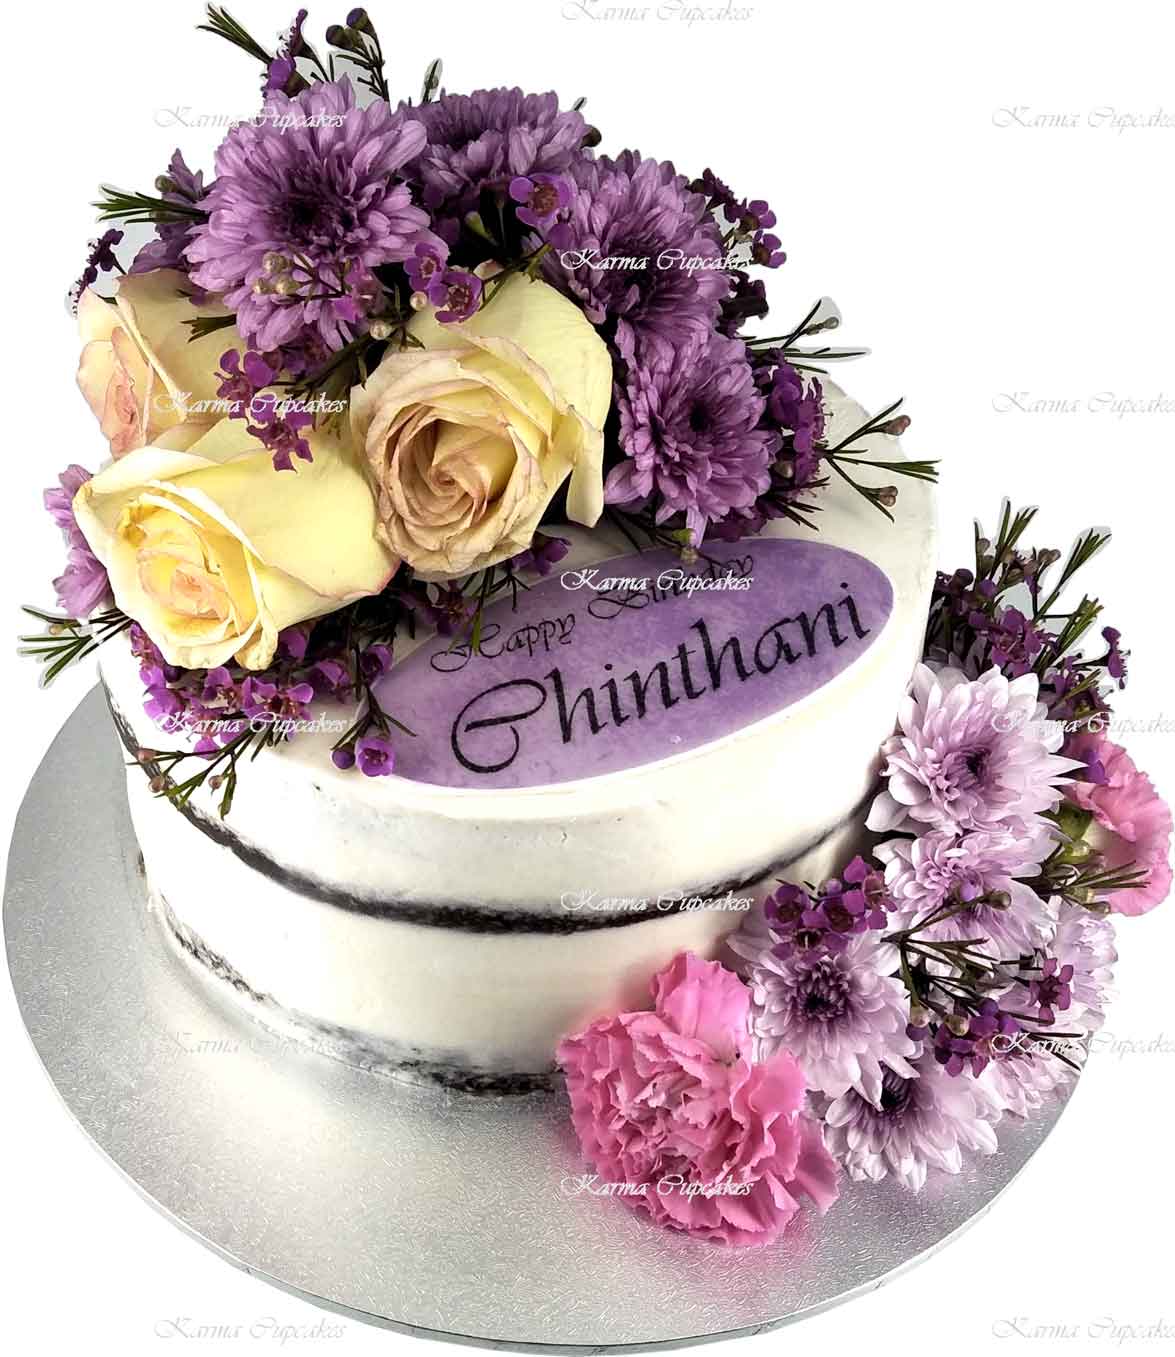 Classic-Fresh-Flowers-Floral-Naked-Cake-Edible-Name-Plaque-purple-yellow-white-old-fashioned